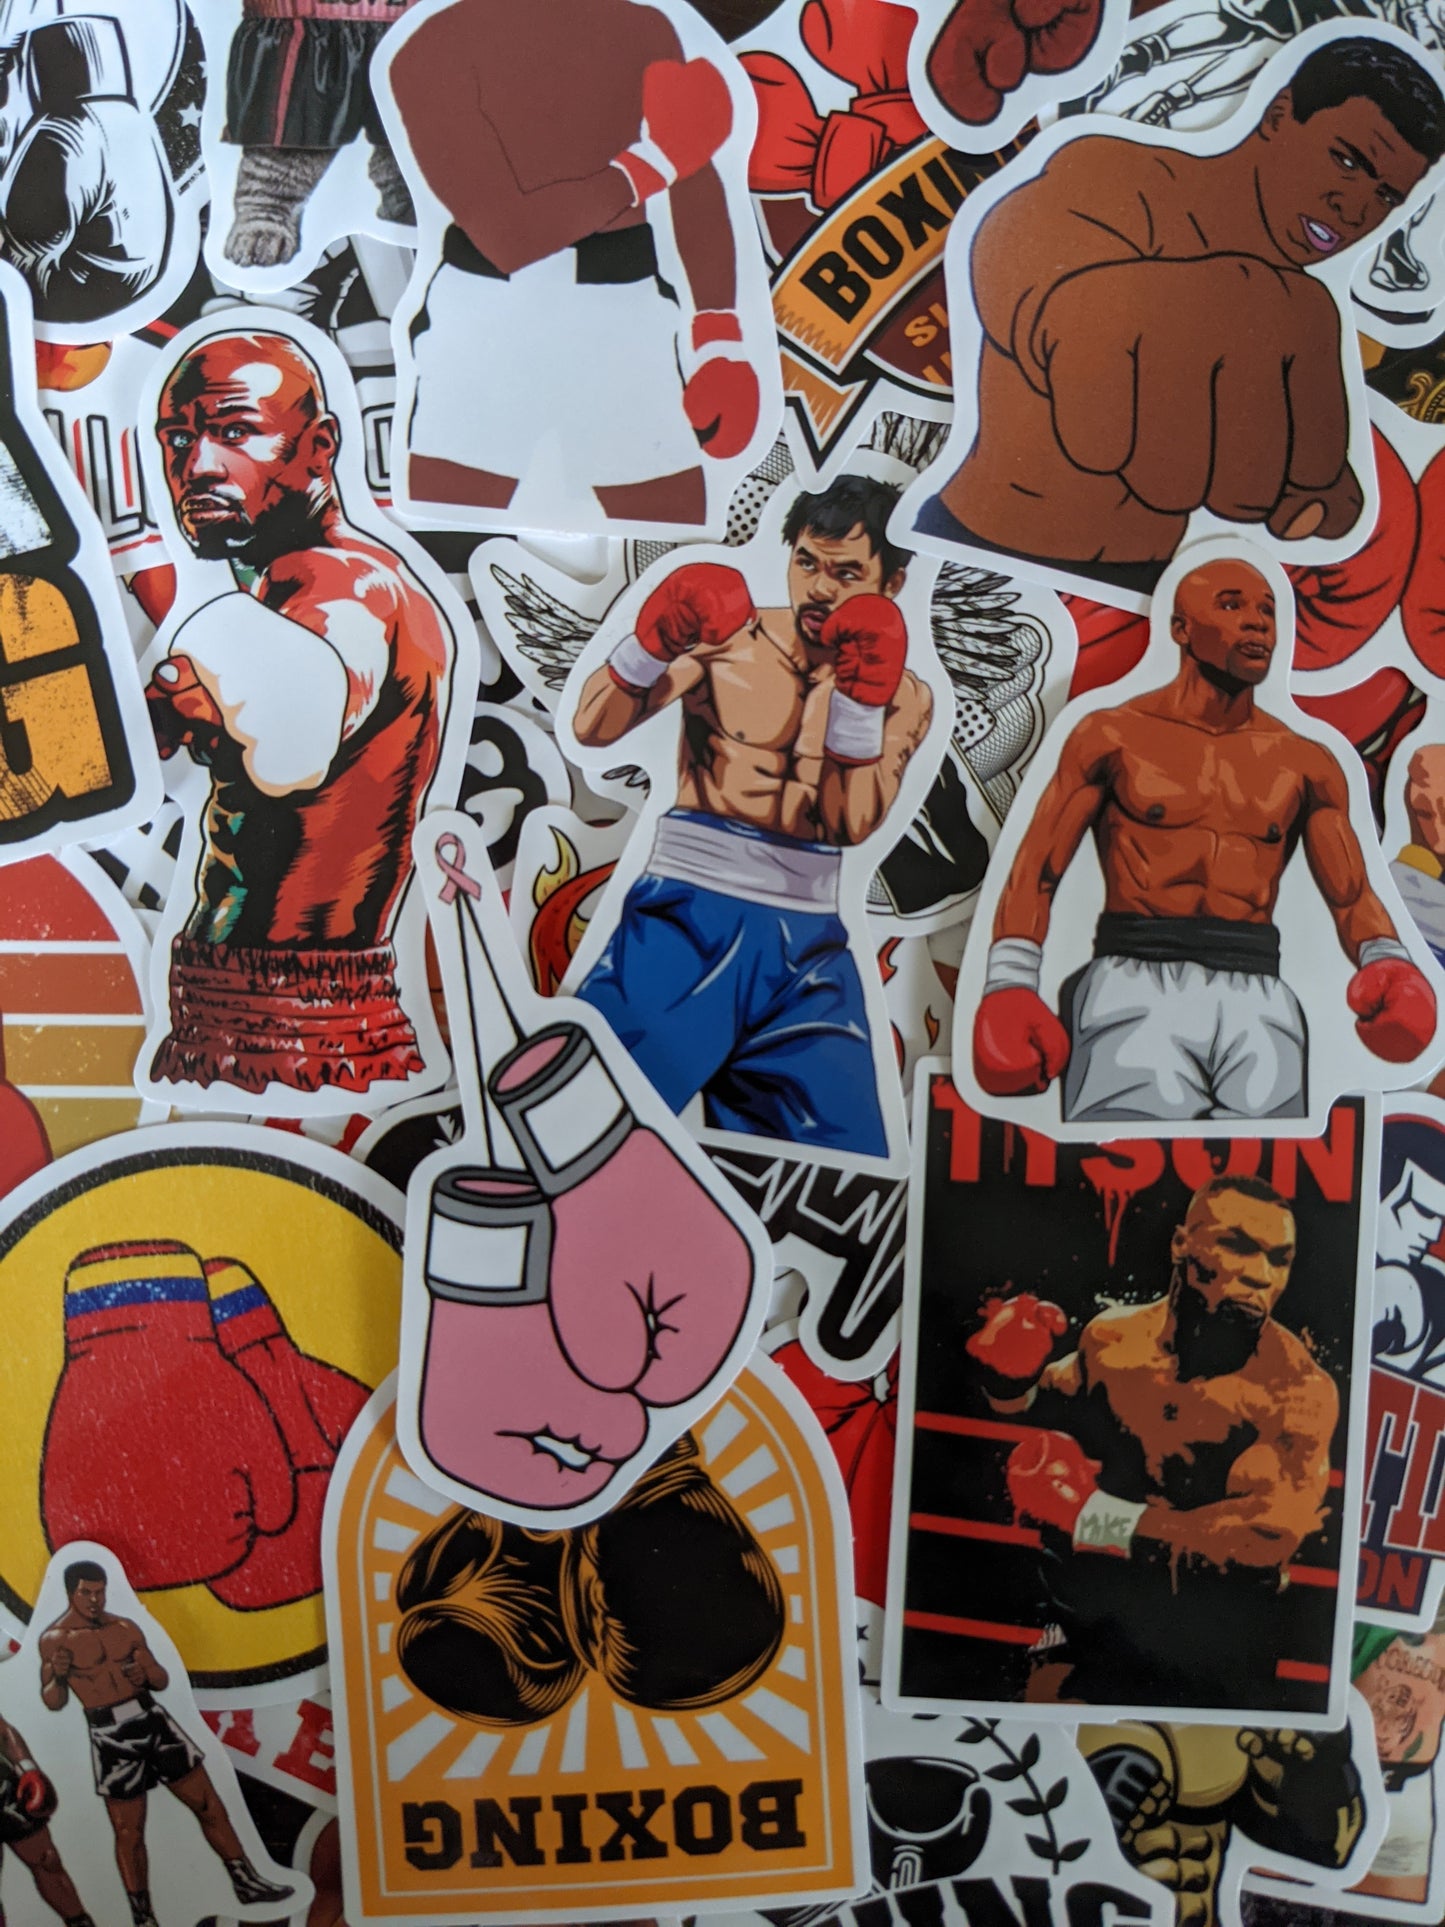 Boxing Sticker Pack